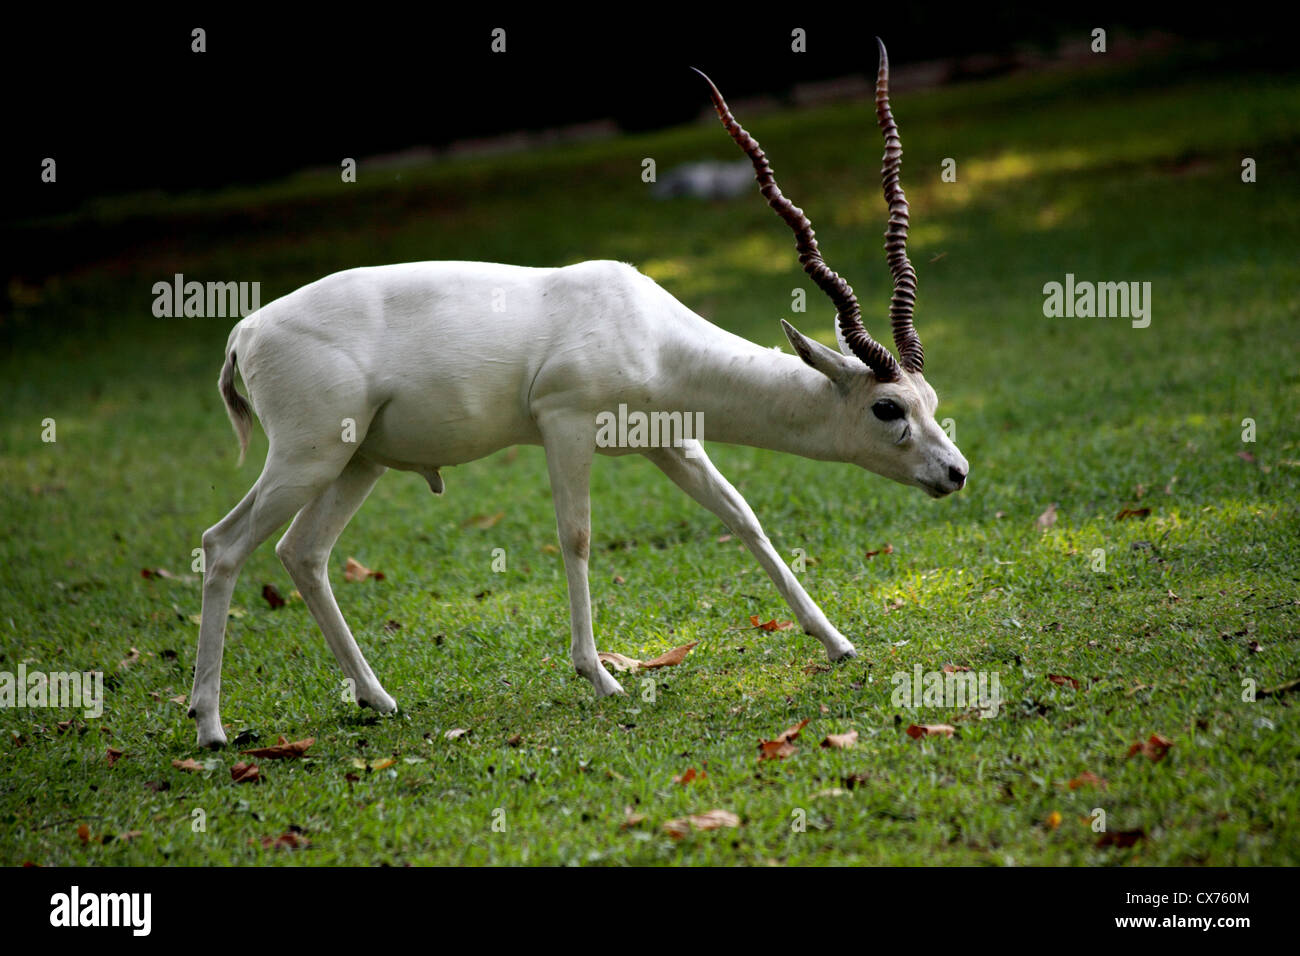 A white antelope in a zoo park Stock Photo